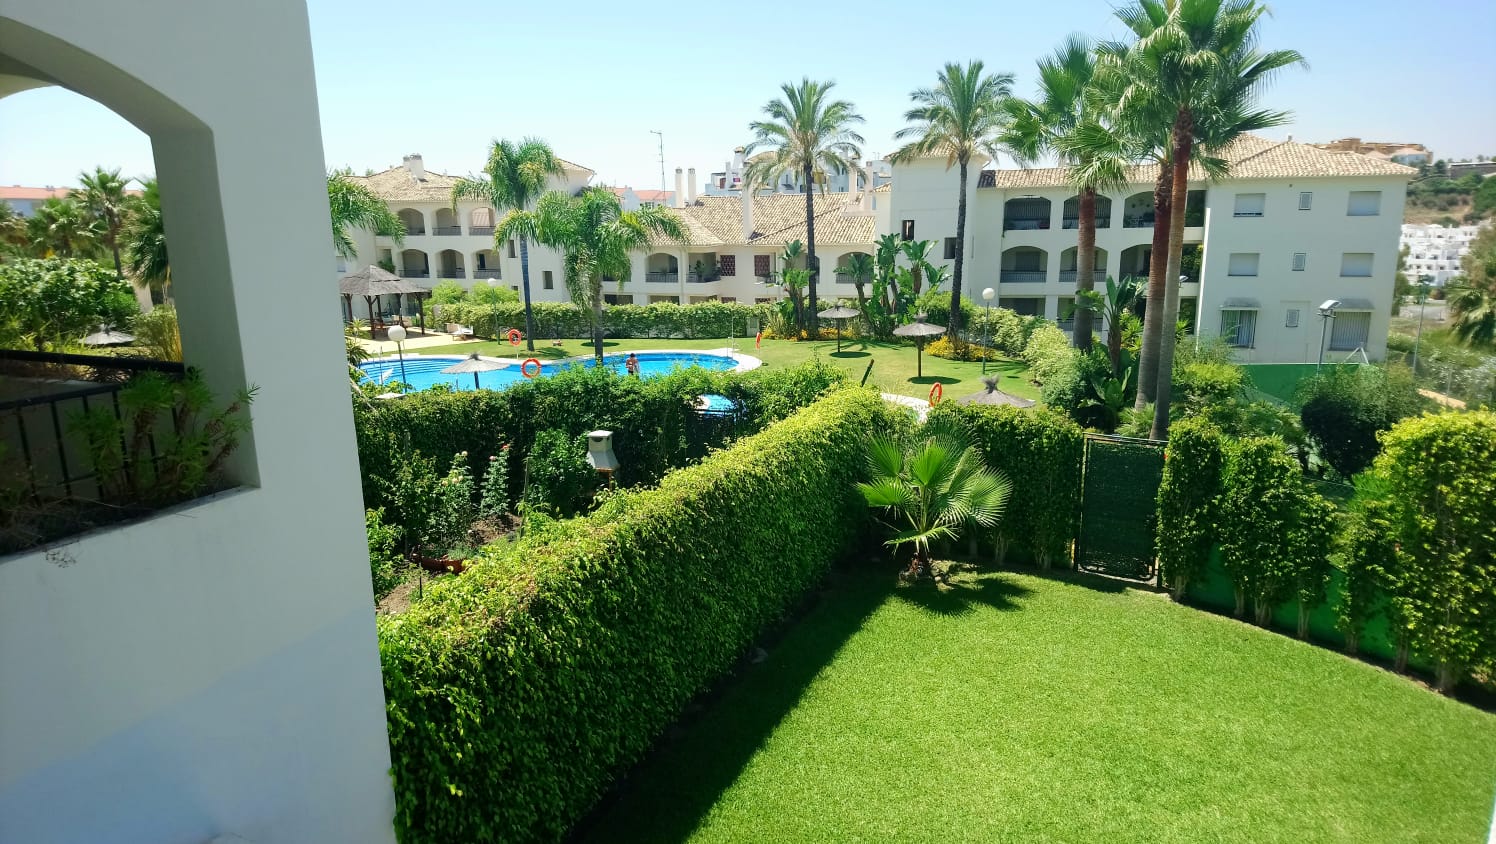 2 bedroom apartment for rent near Selwo park in Estepona - mibgroup.es